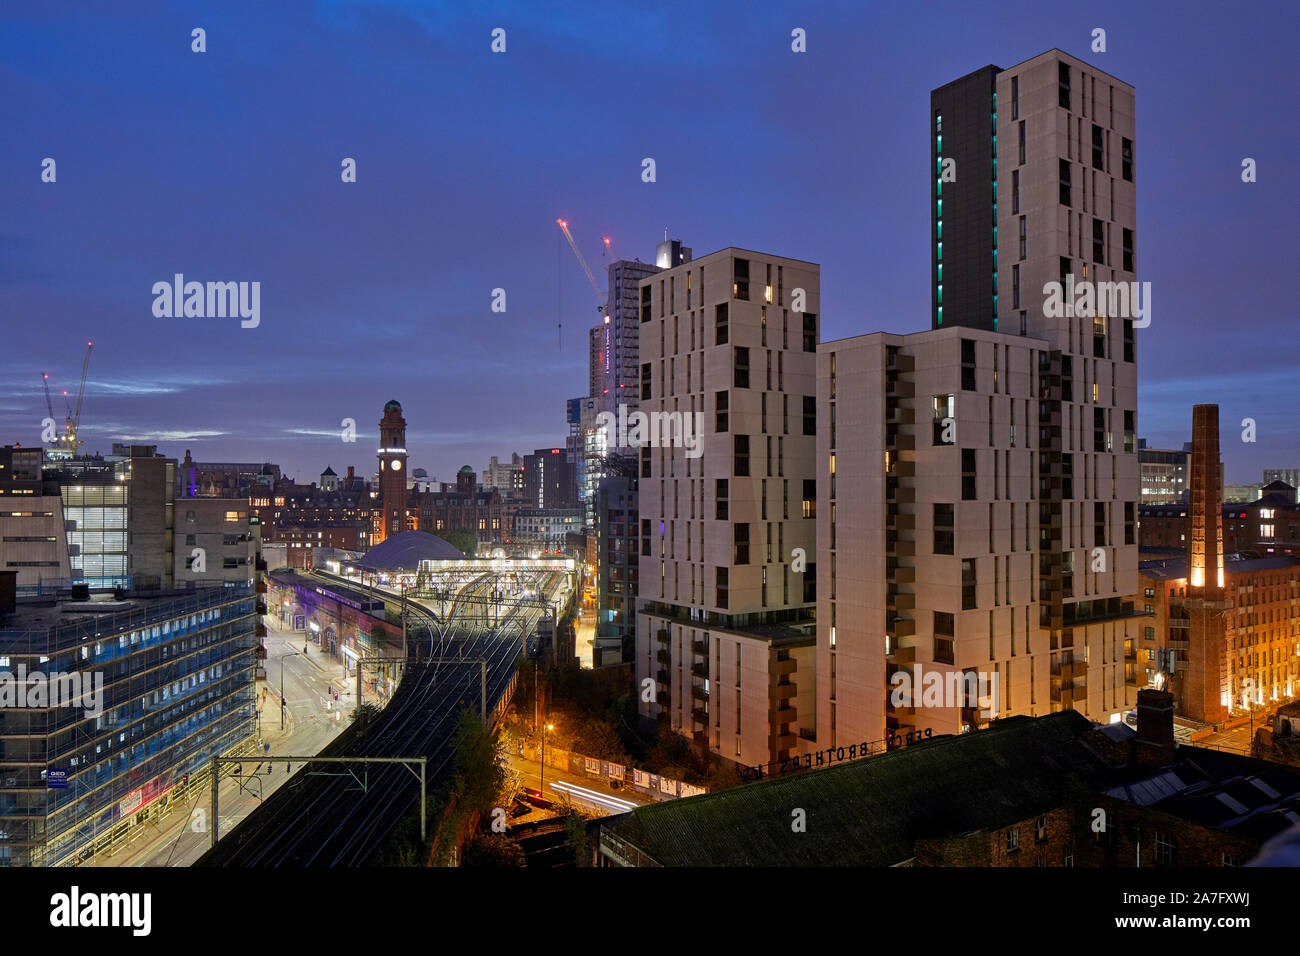 Manchester skyline, new build modern apartments 1 Cambridge St, and Oxford Road railway station along Whitworth Street Stock Photo